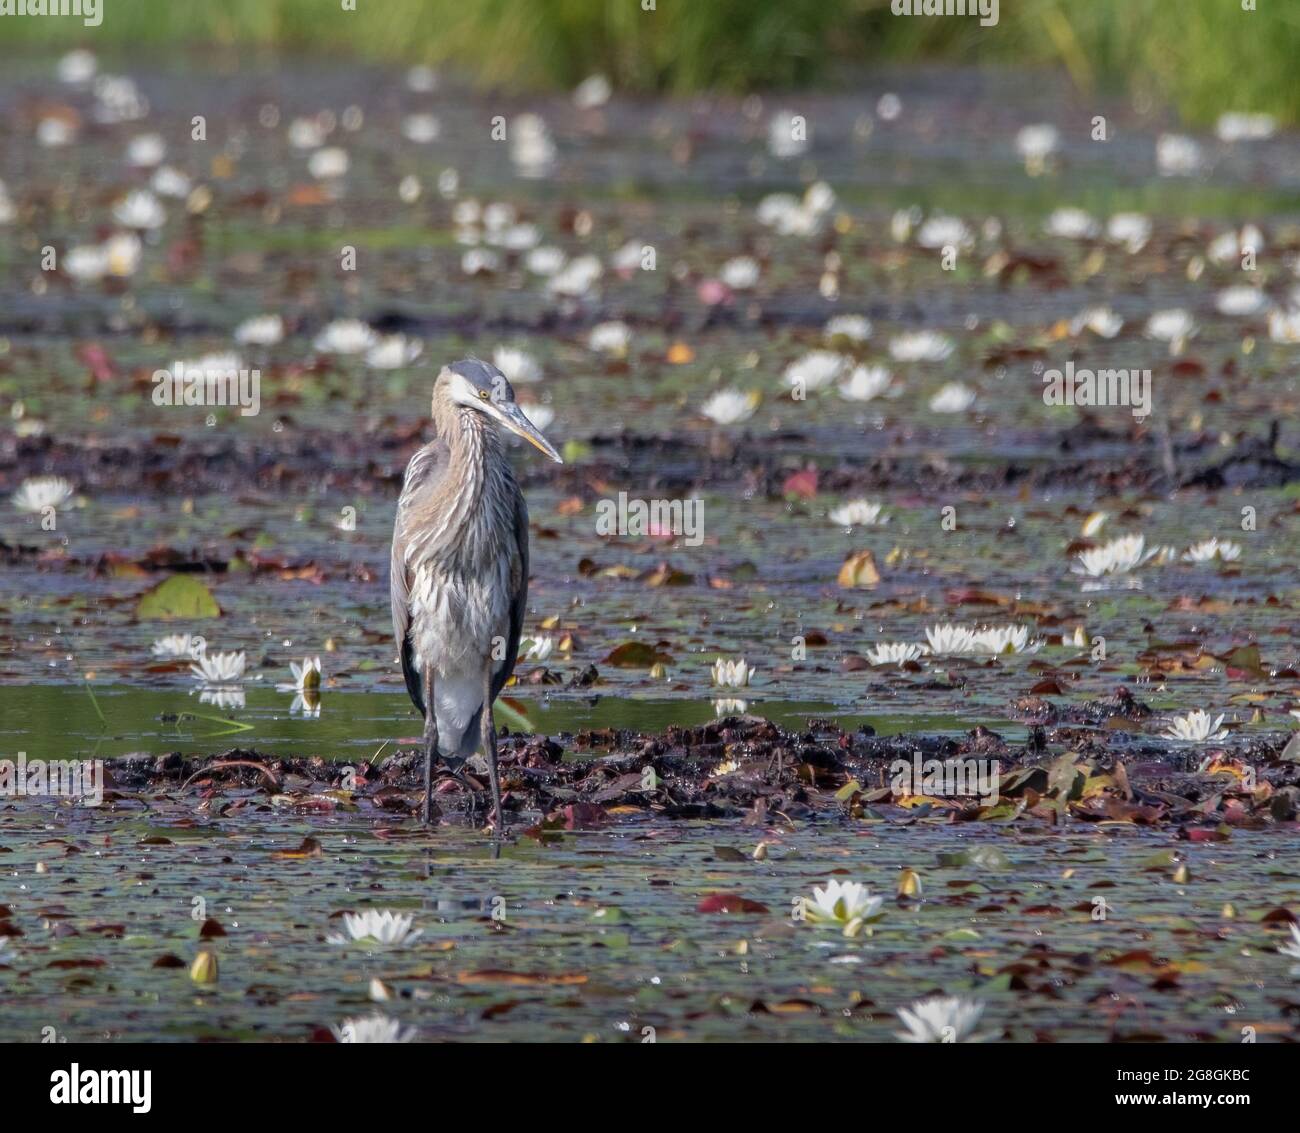 A great blue heron ( Ardea herodias) standing in a marsh pond full of water lilies Stock Photo